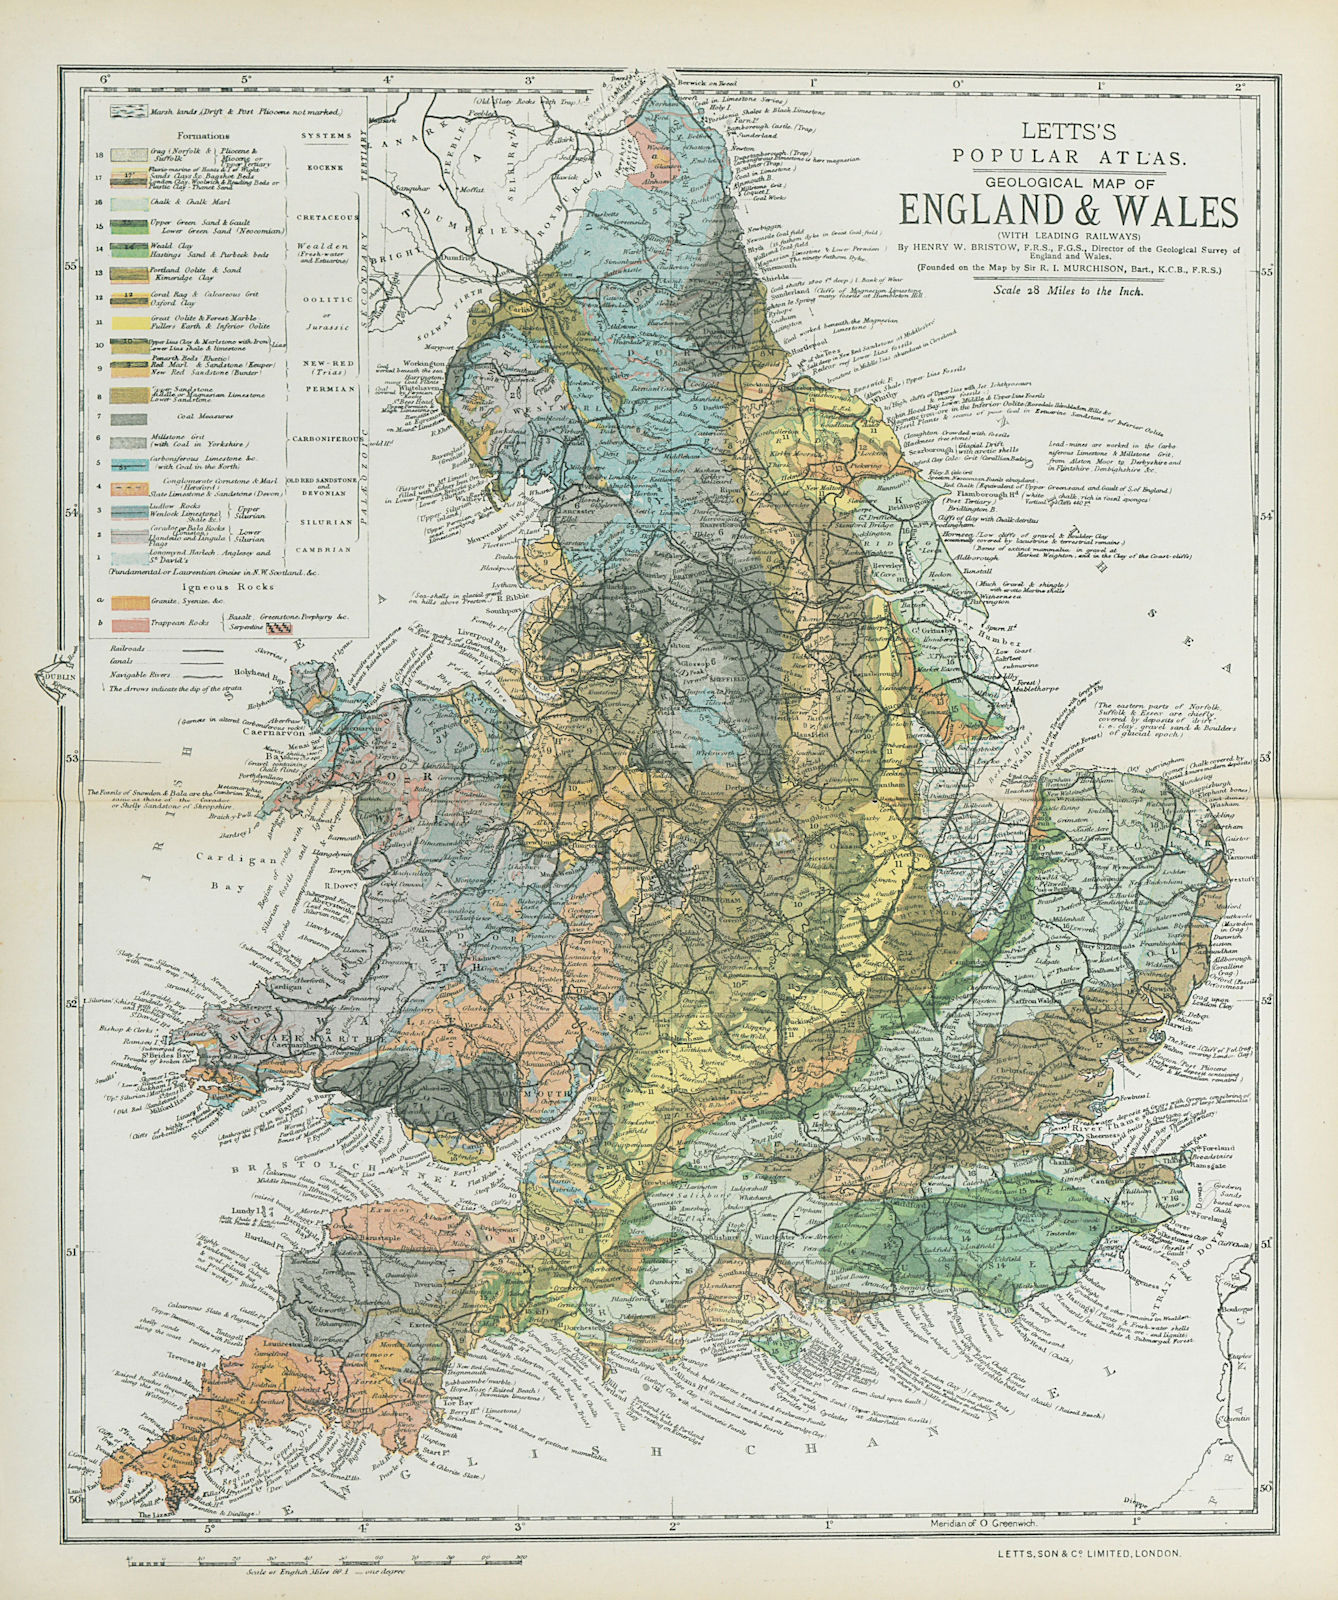 Associate Product ENGLAND & WALES colour geological Map. LETTS 1883 old antique plan chart